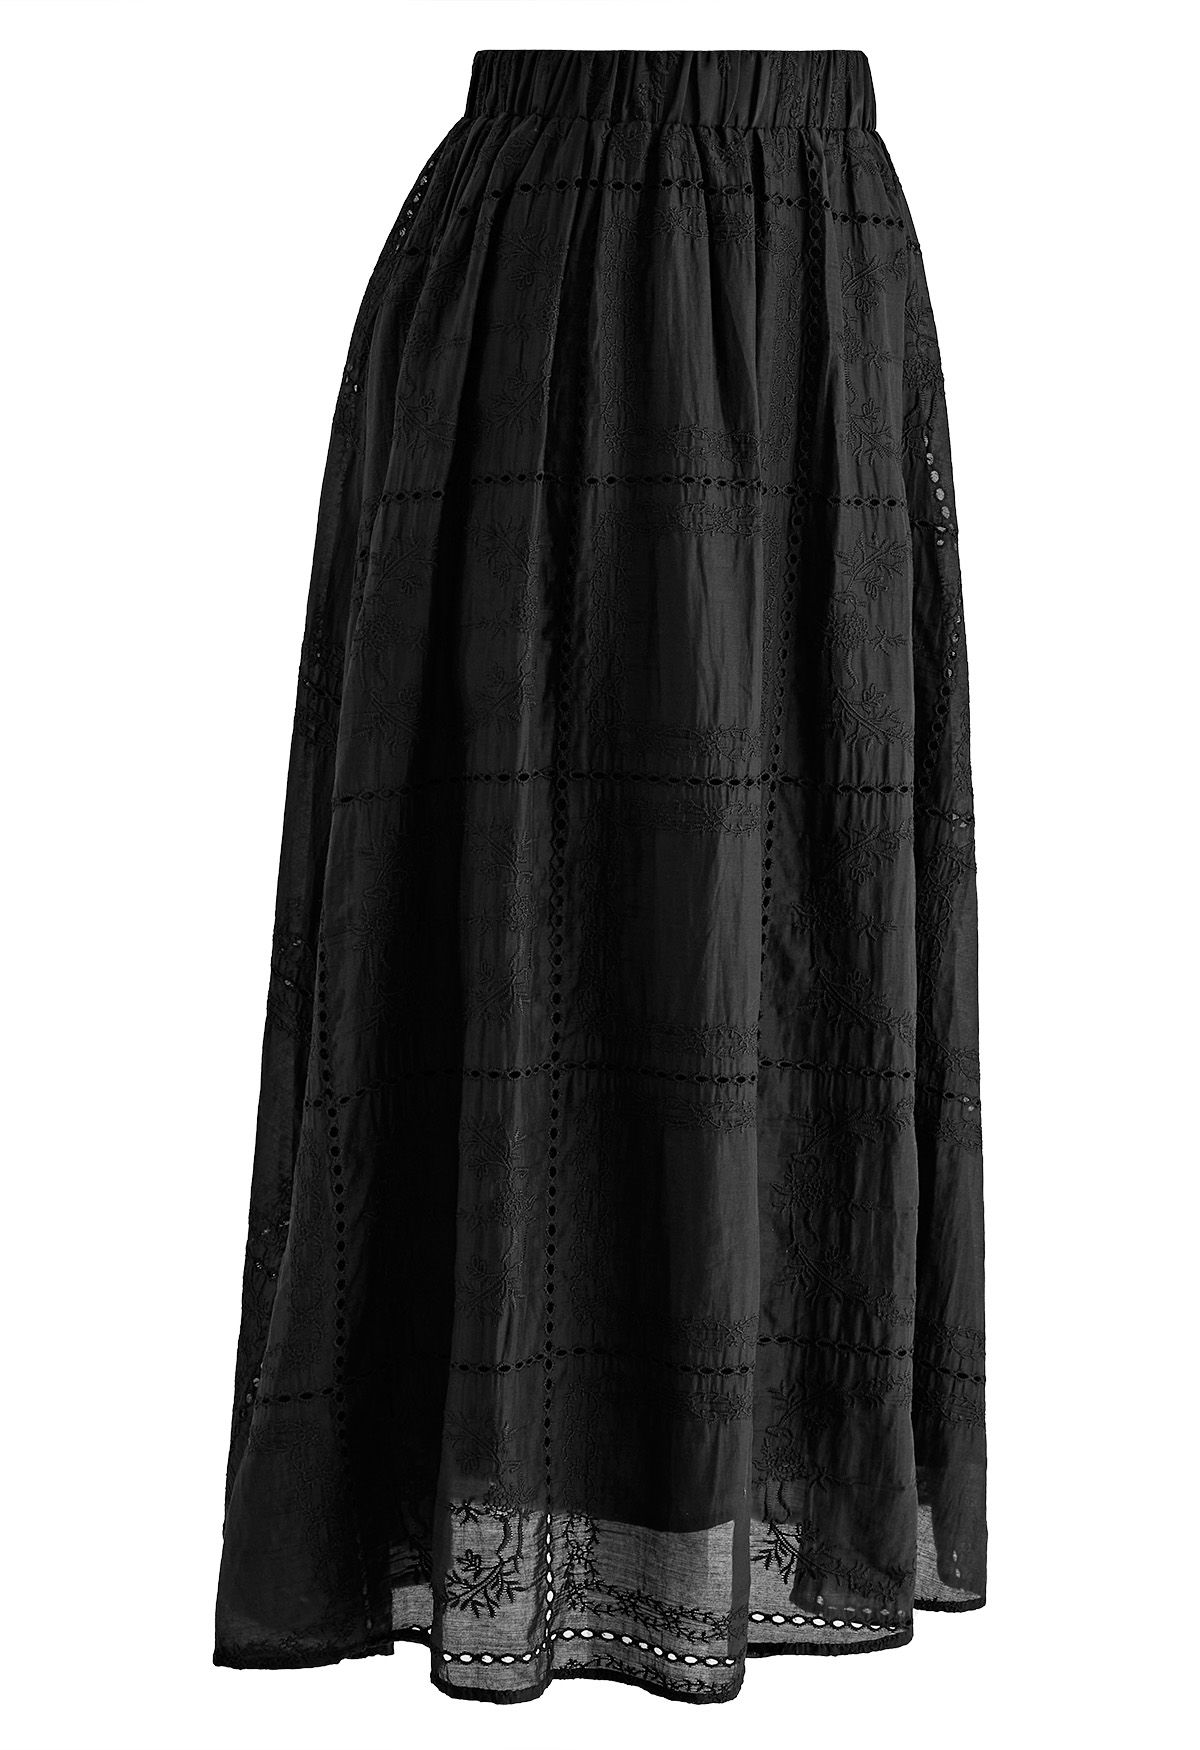 Branch Embroidery Checked Maxi Skirt in Black - Retro, Indie and Unique ...